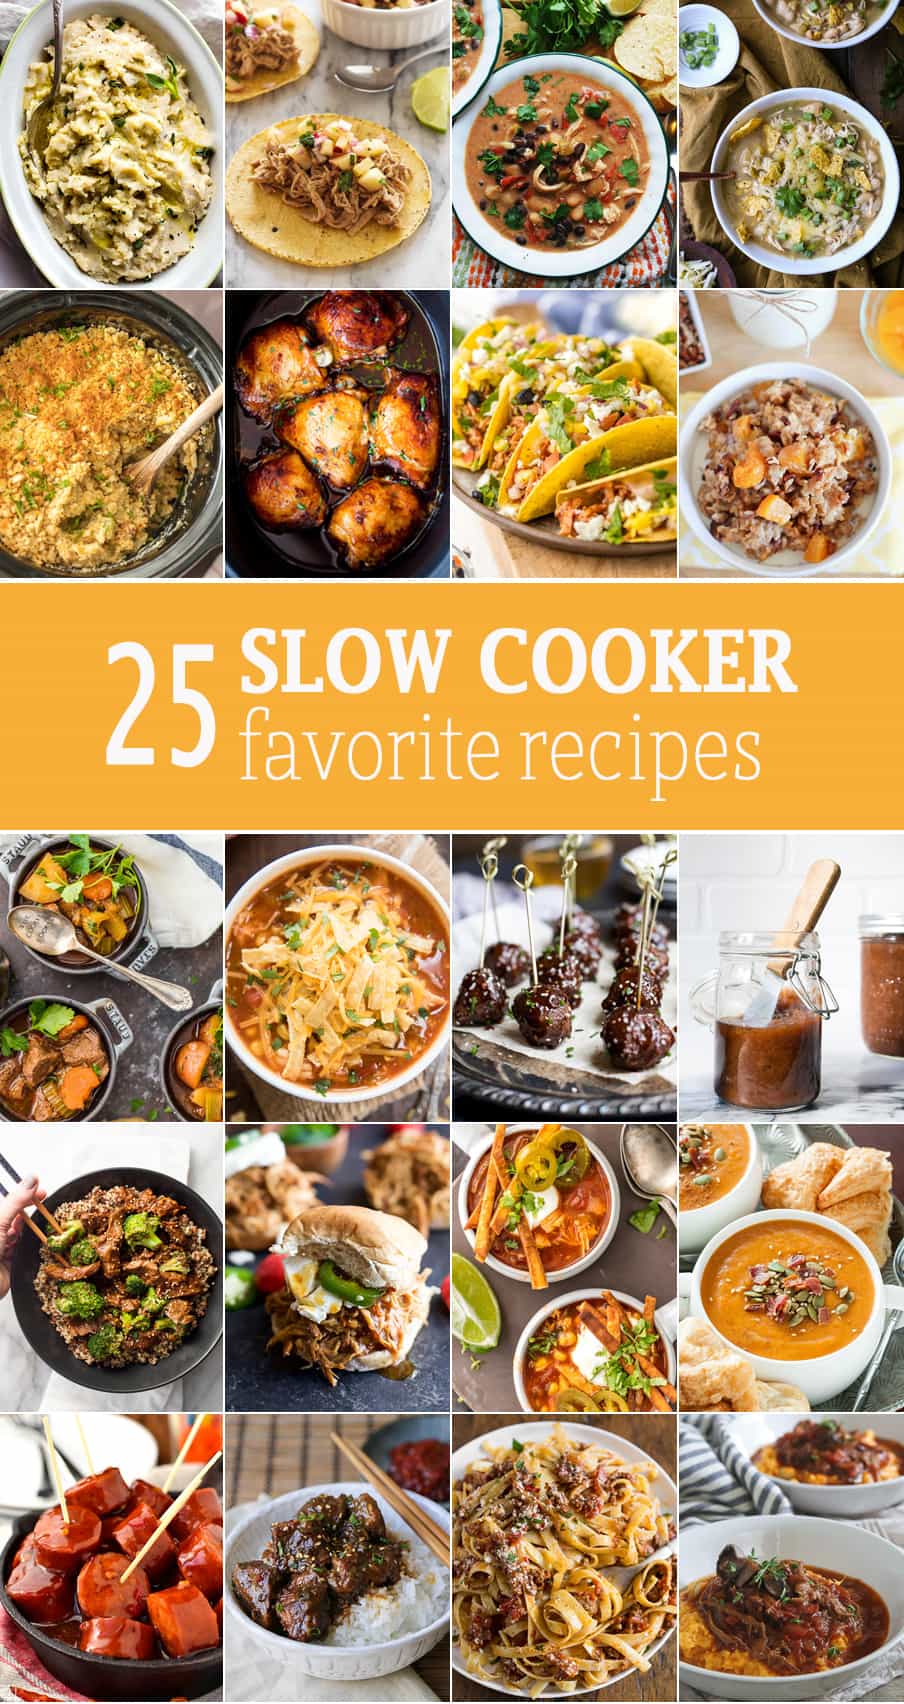 10 Slow Cooker Favorites - The Cookie Rookie®